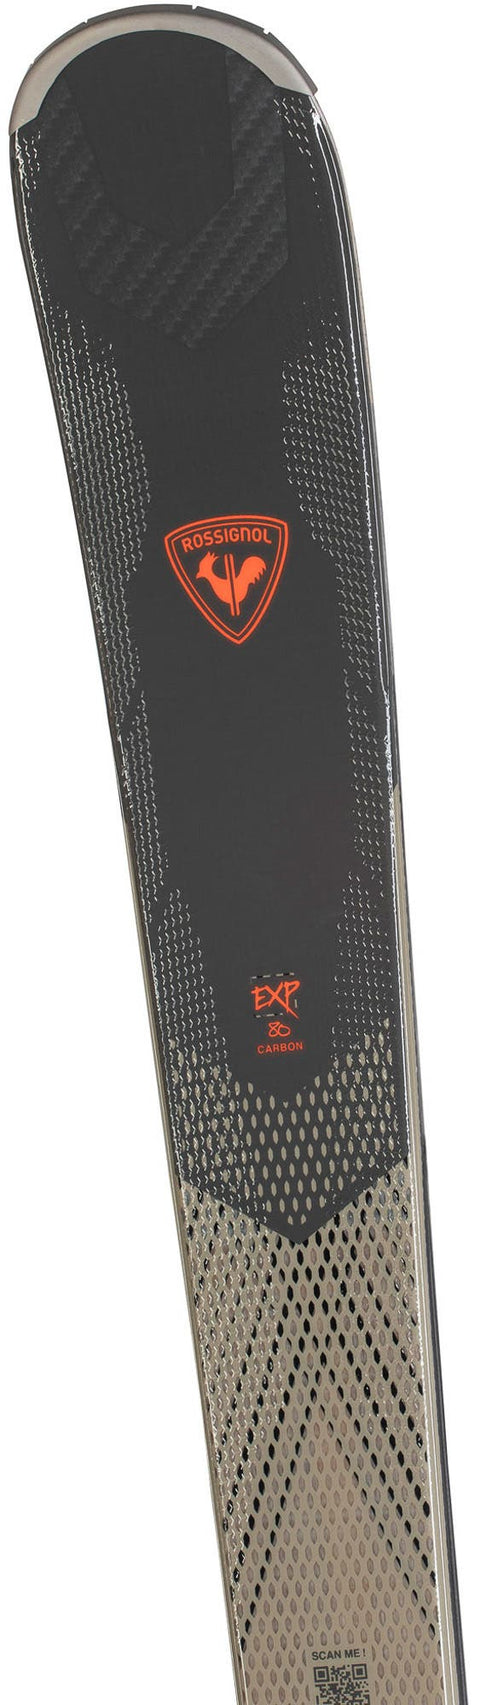 Rossignol - EXPERIENCE 80 CARBON XPRESS - Image 4